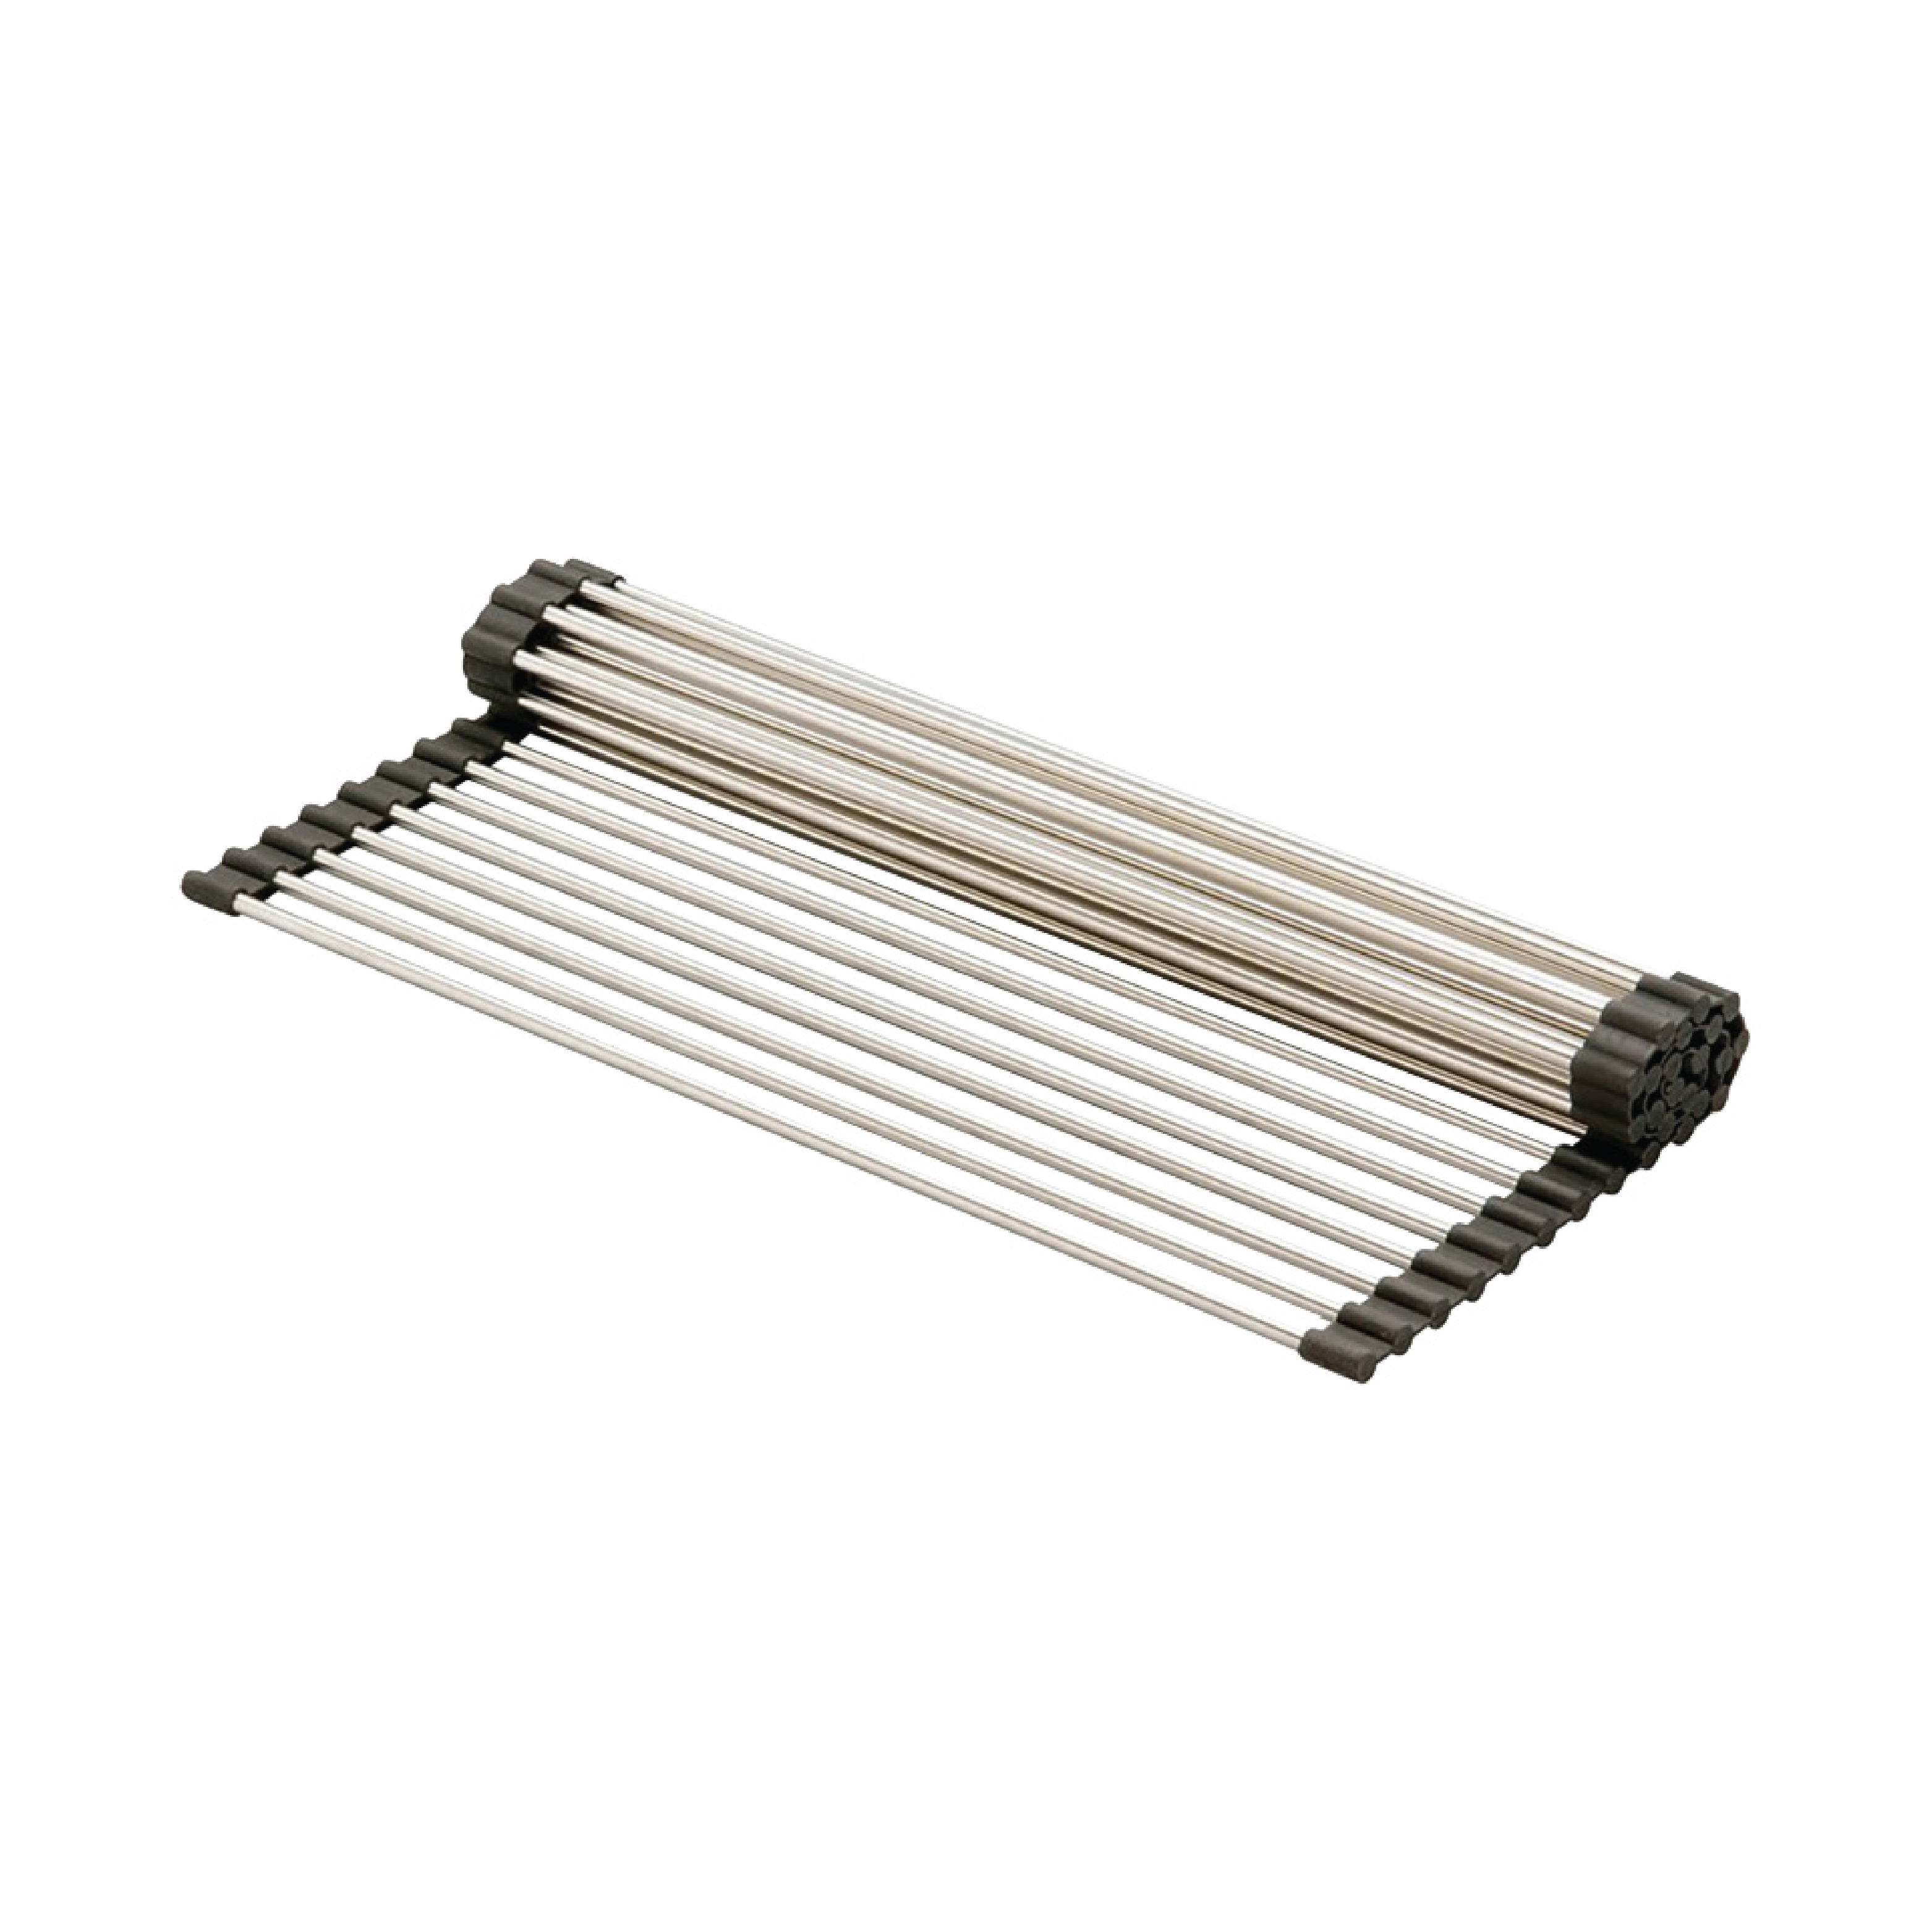 17" Stainless Steel Rolling Grid